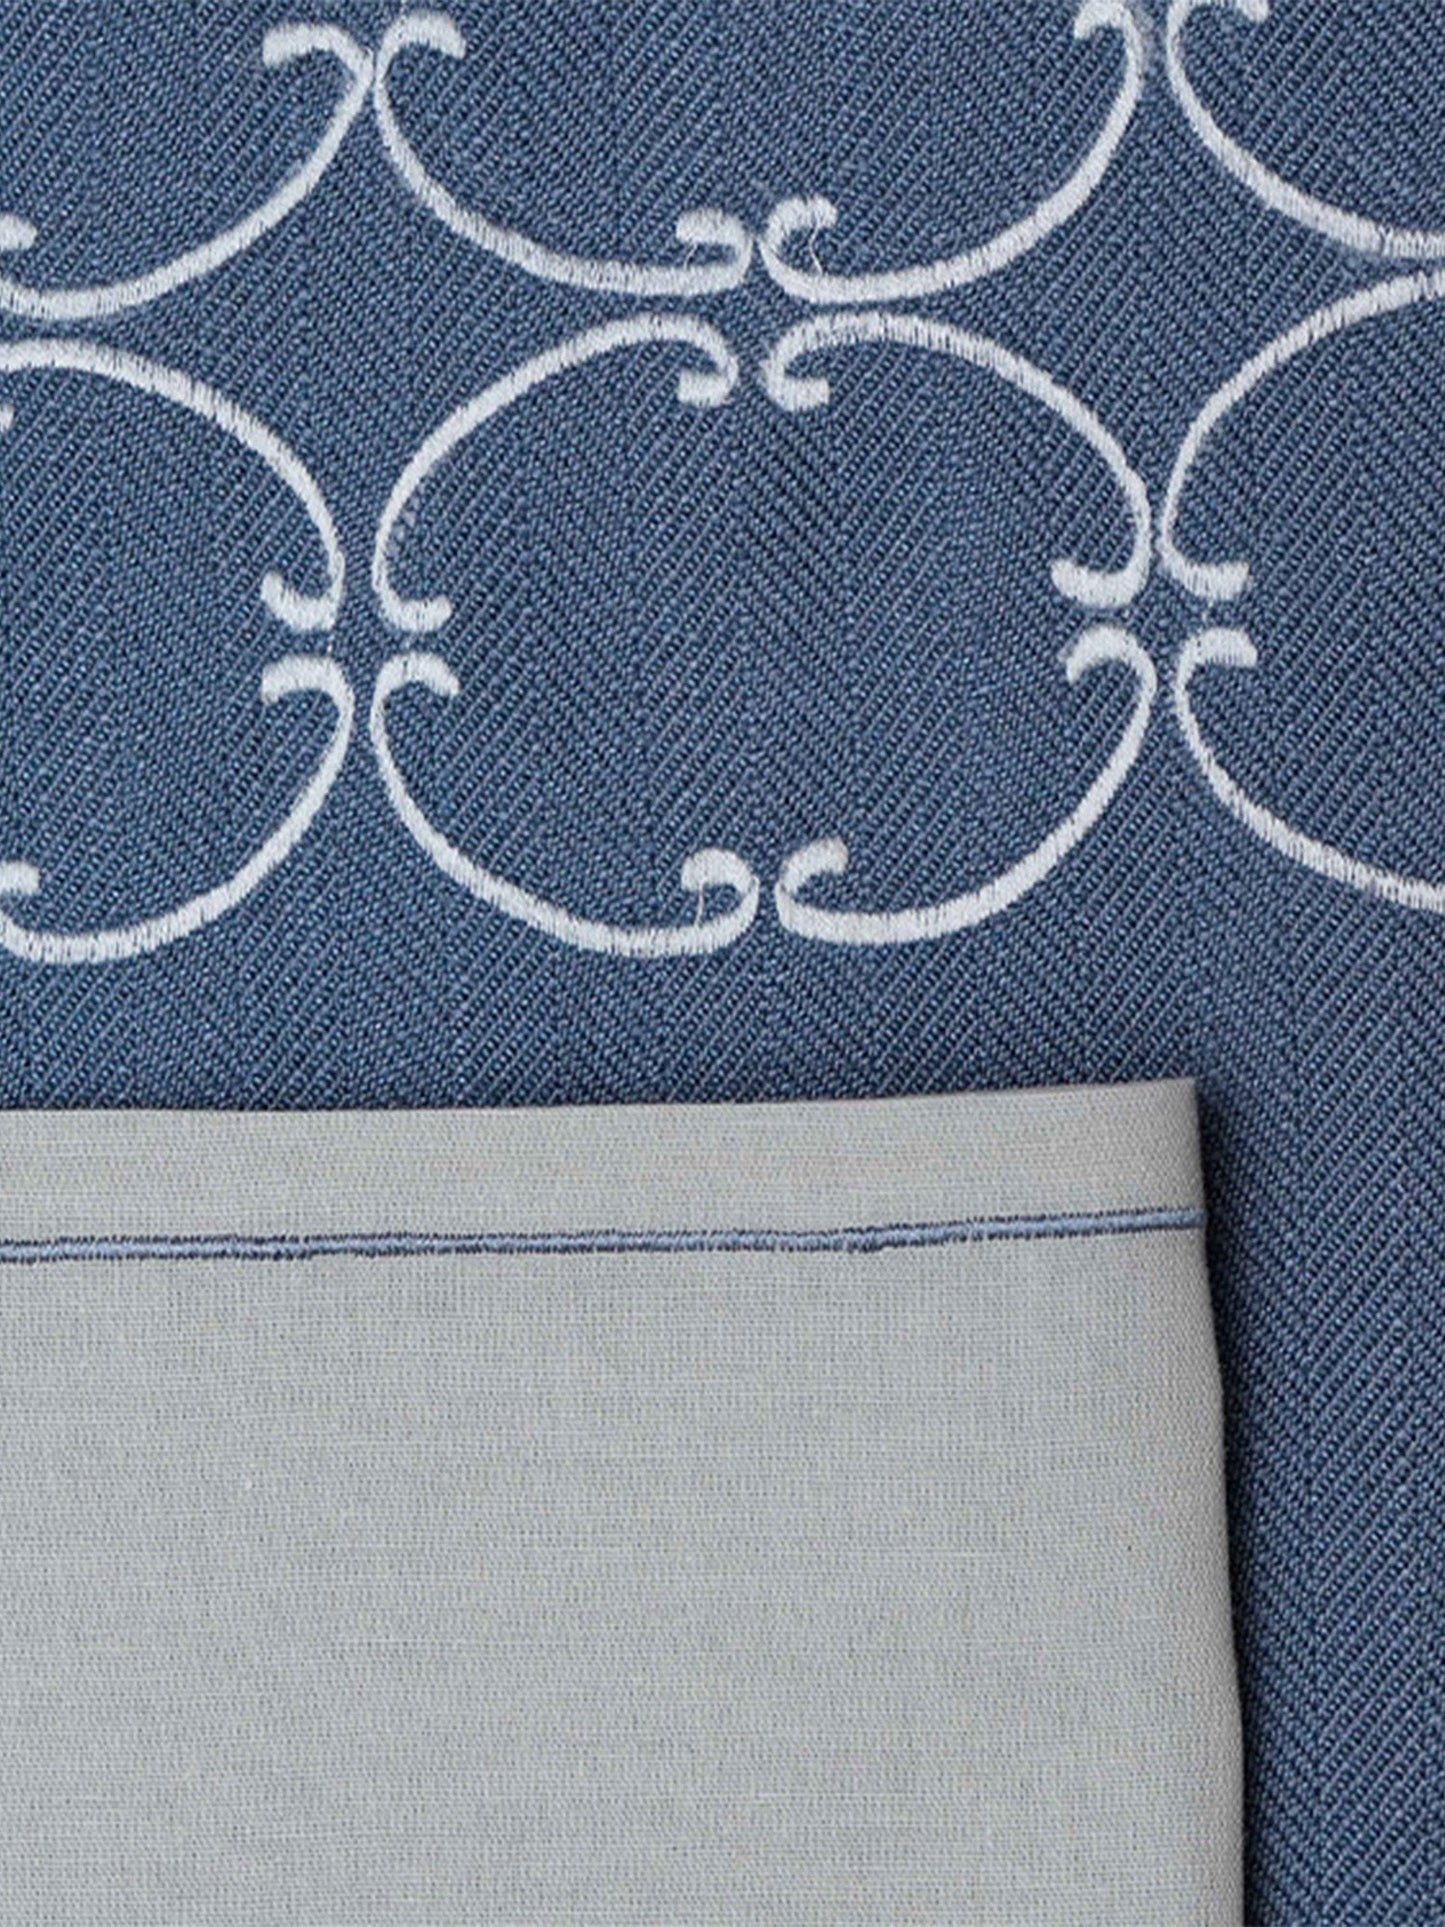 closeup of embroidered dinner table placemats and embroidered napkins set of 6 each in blue shades - 13x19 inch 